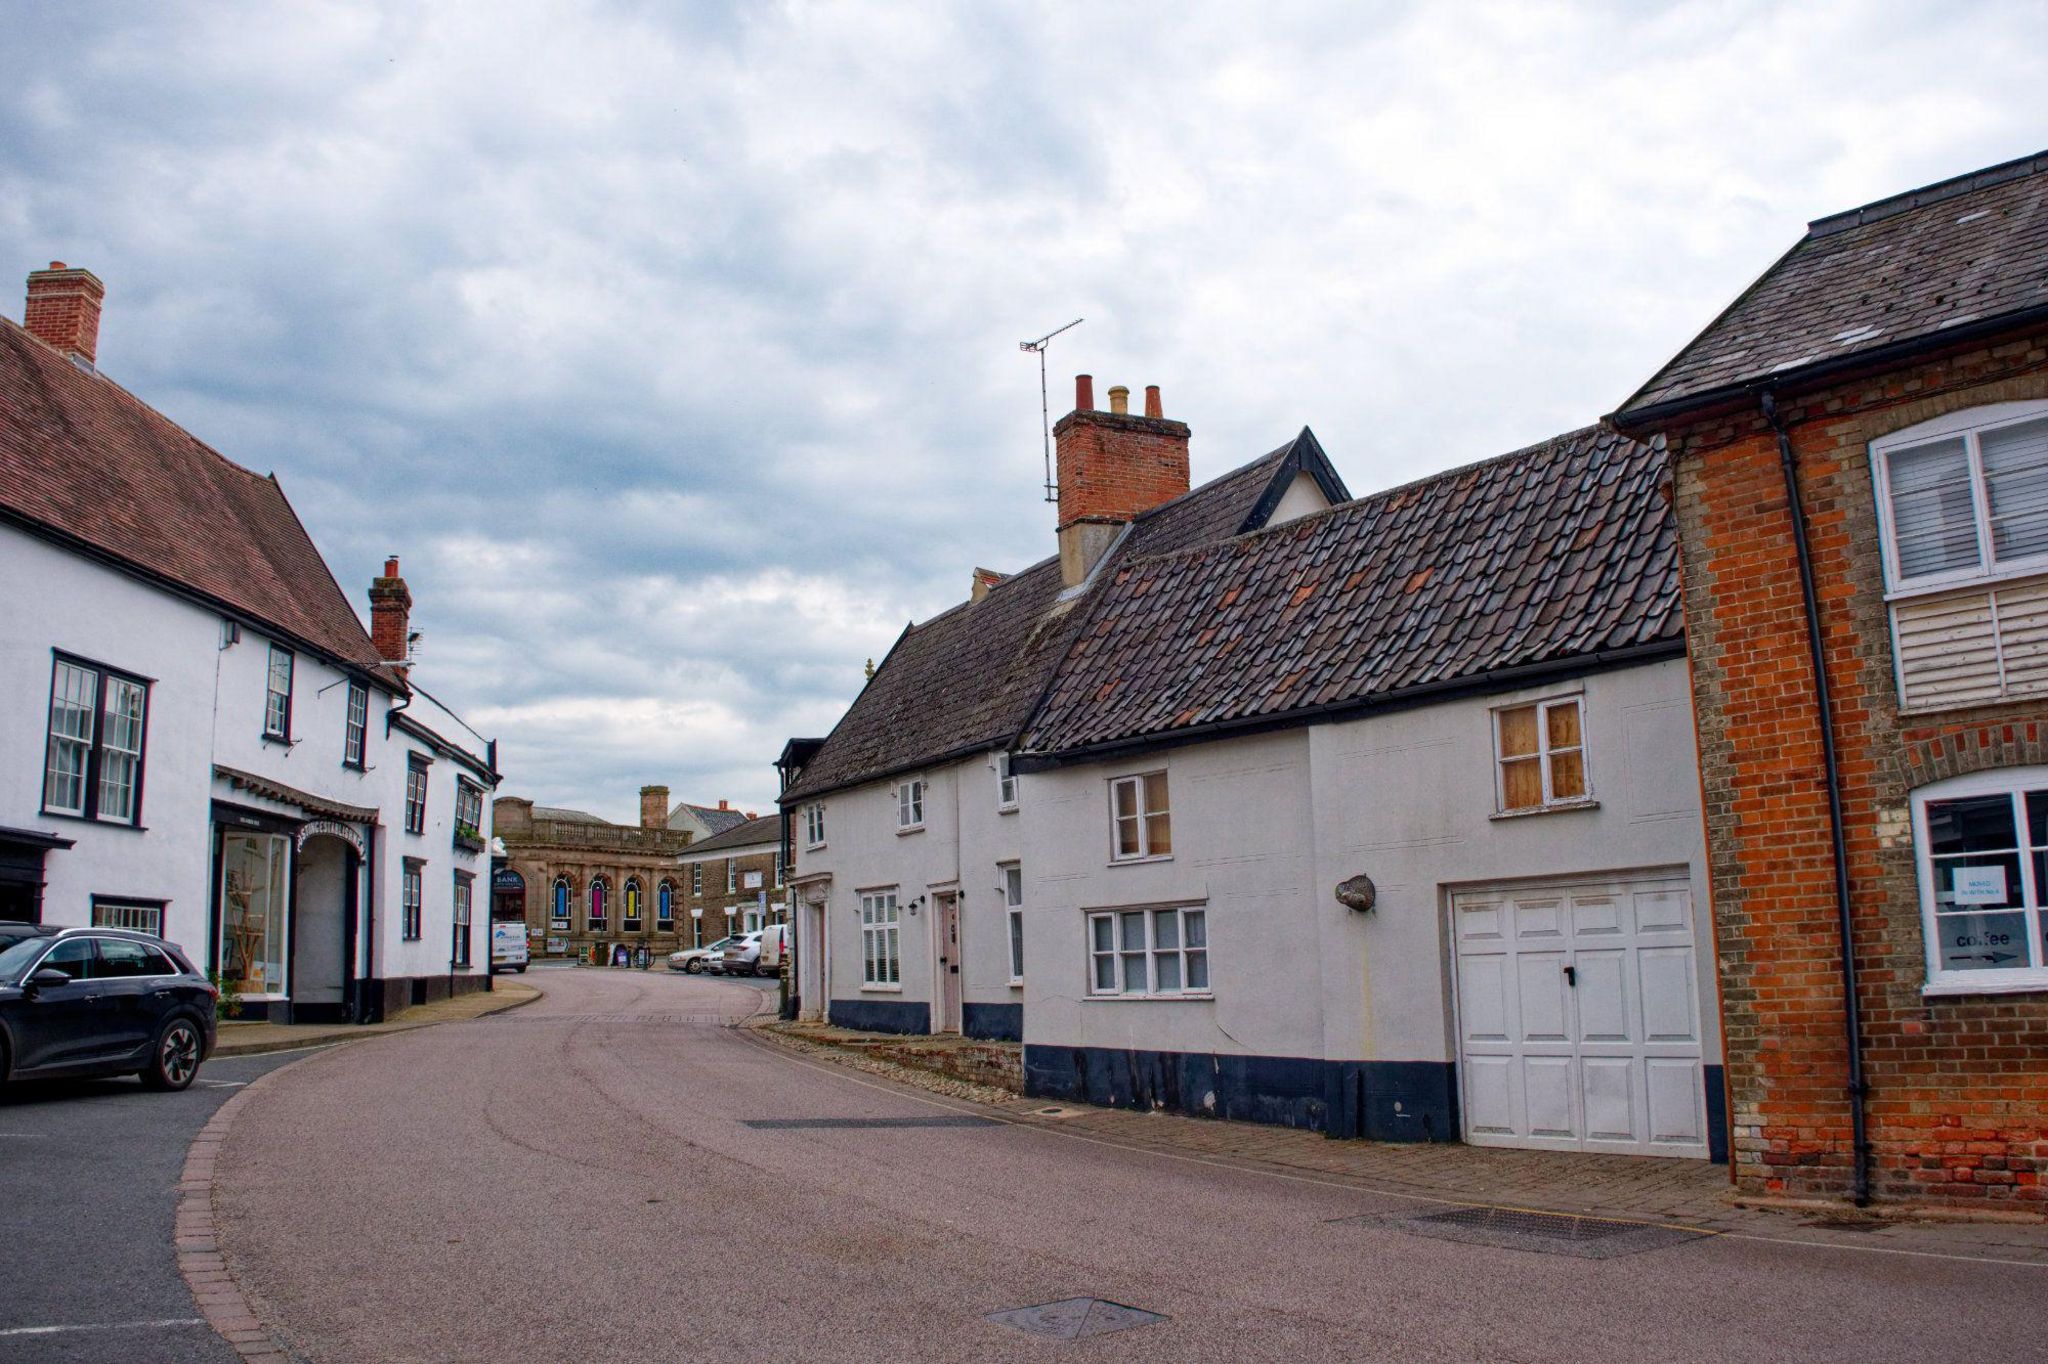 View up the main road in Eye, Suffolk